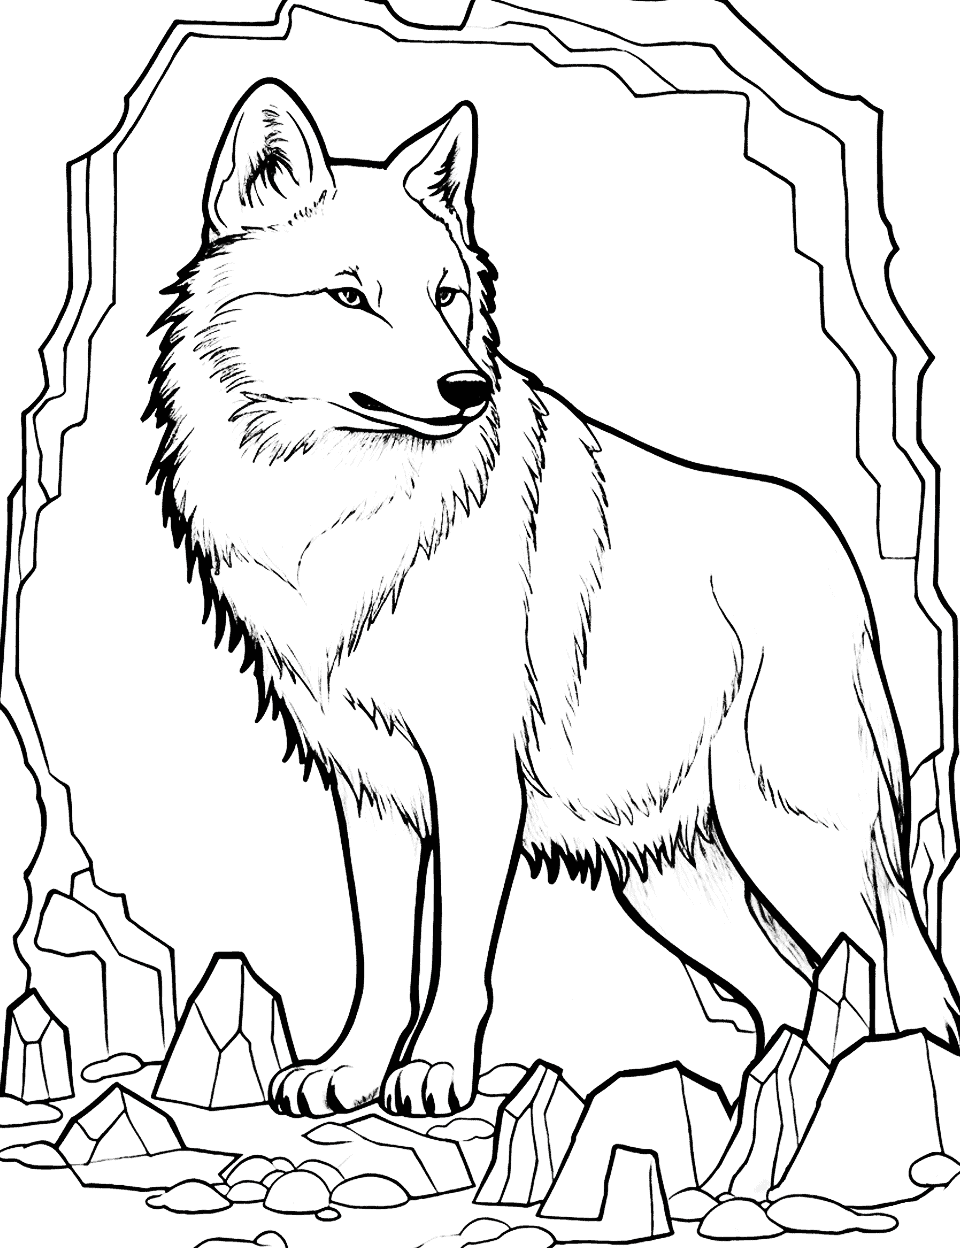 Wolf and Crystal Cave Coloring Page - A wolf discovering a cave filled with glistening crystals and gems.